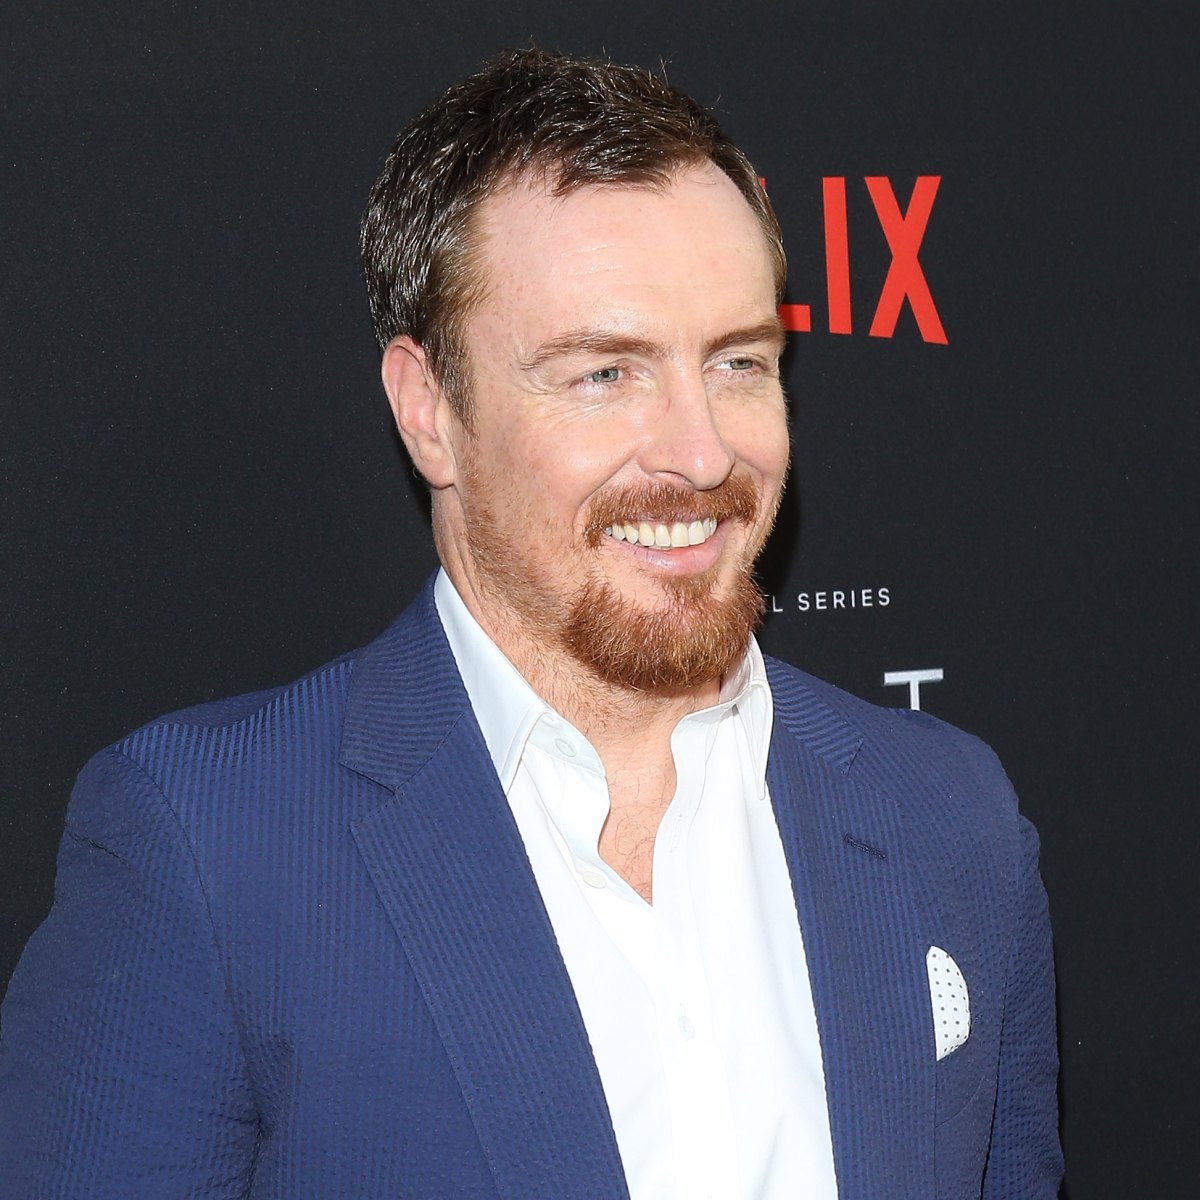 Toby Stephens: 'Bond became ridiculous